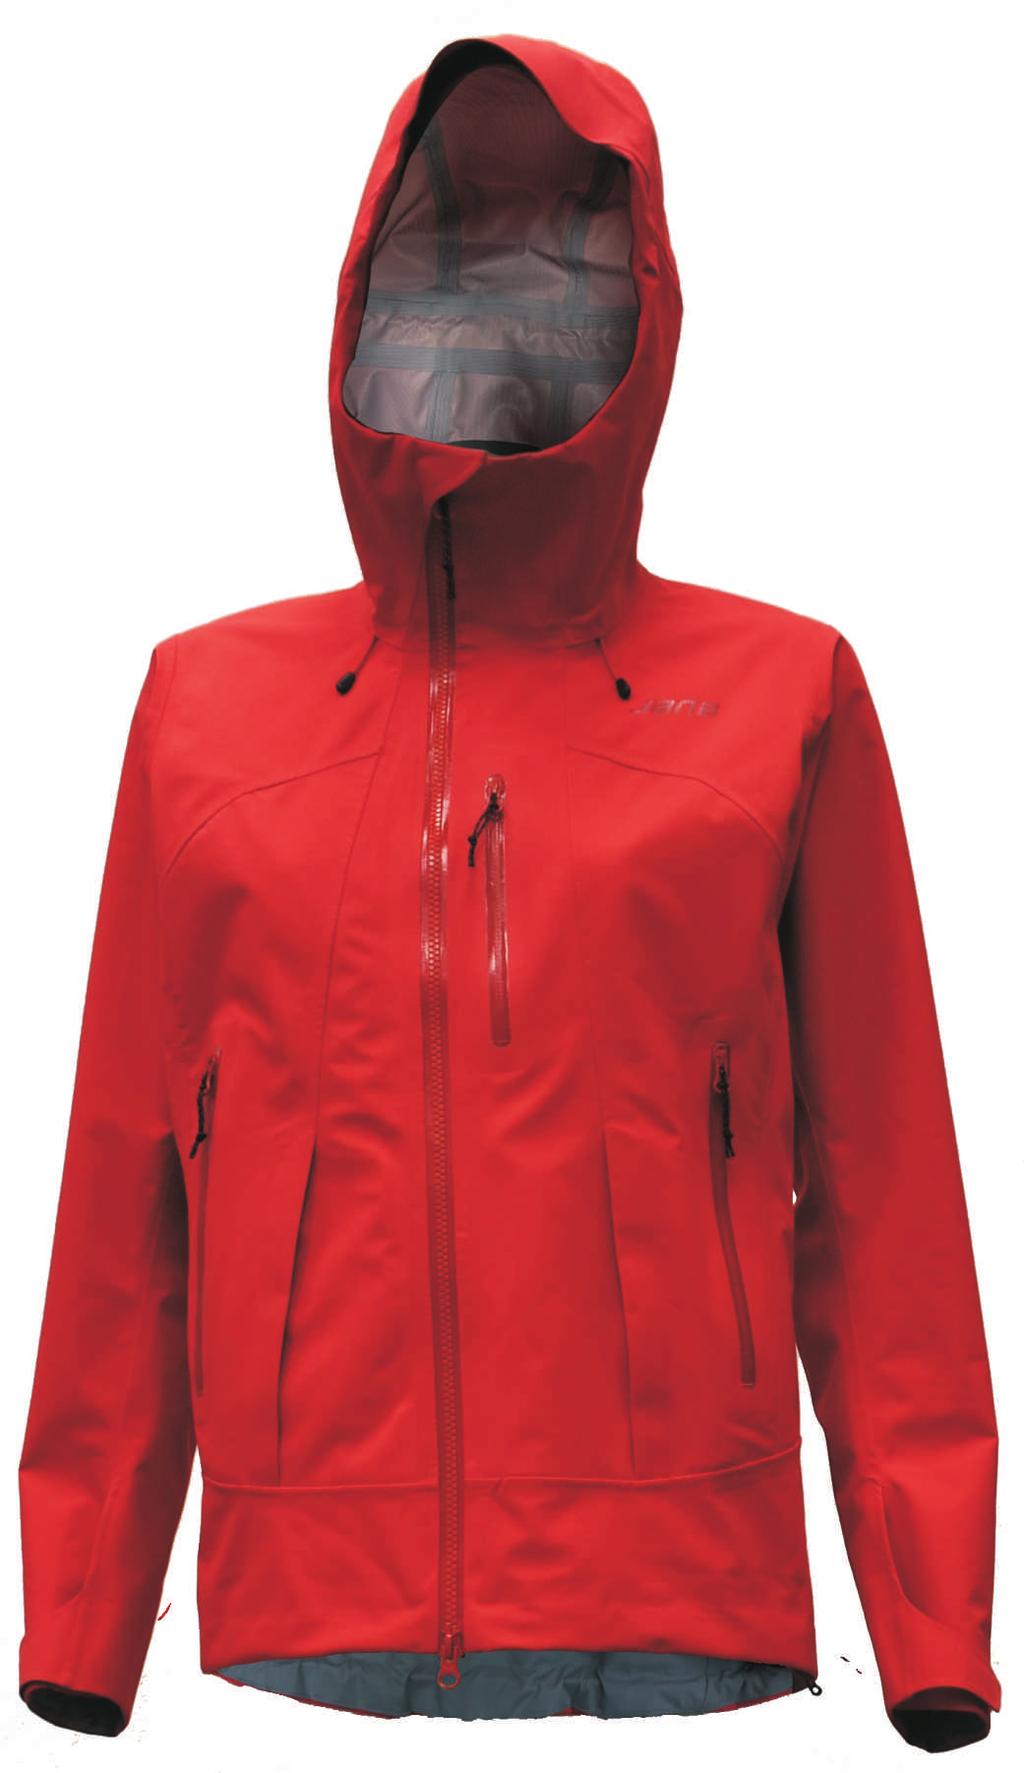 * W s 3L high-performance mountaineering jacket with ergonomic cut * Asymmetric CF zipper providing comfort at chin * Hood visor with moldable and soft construction